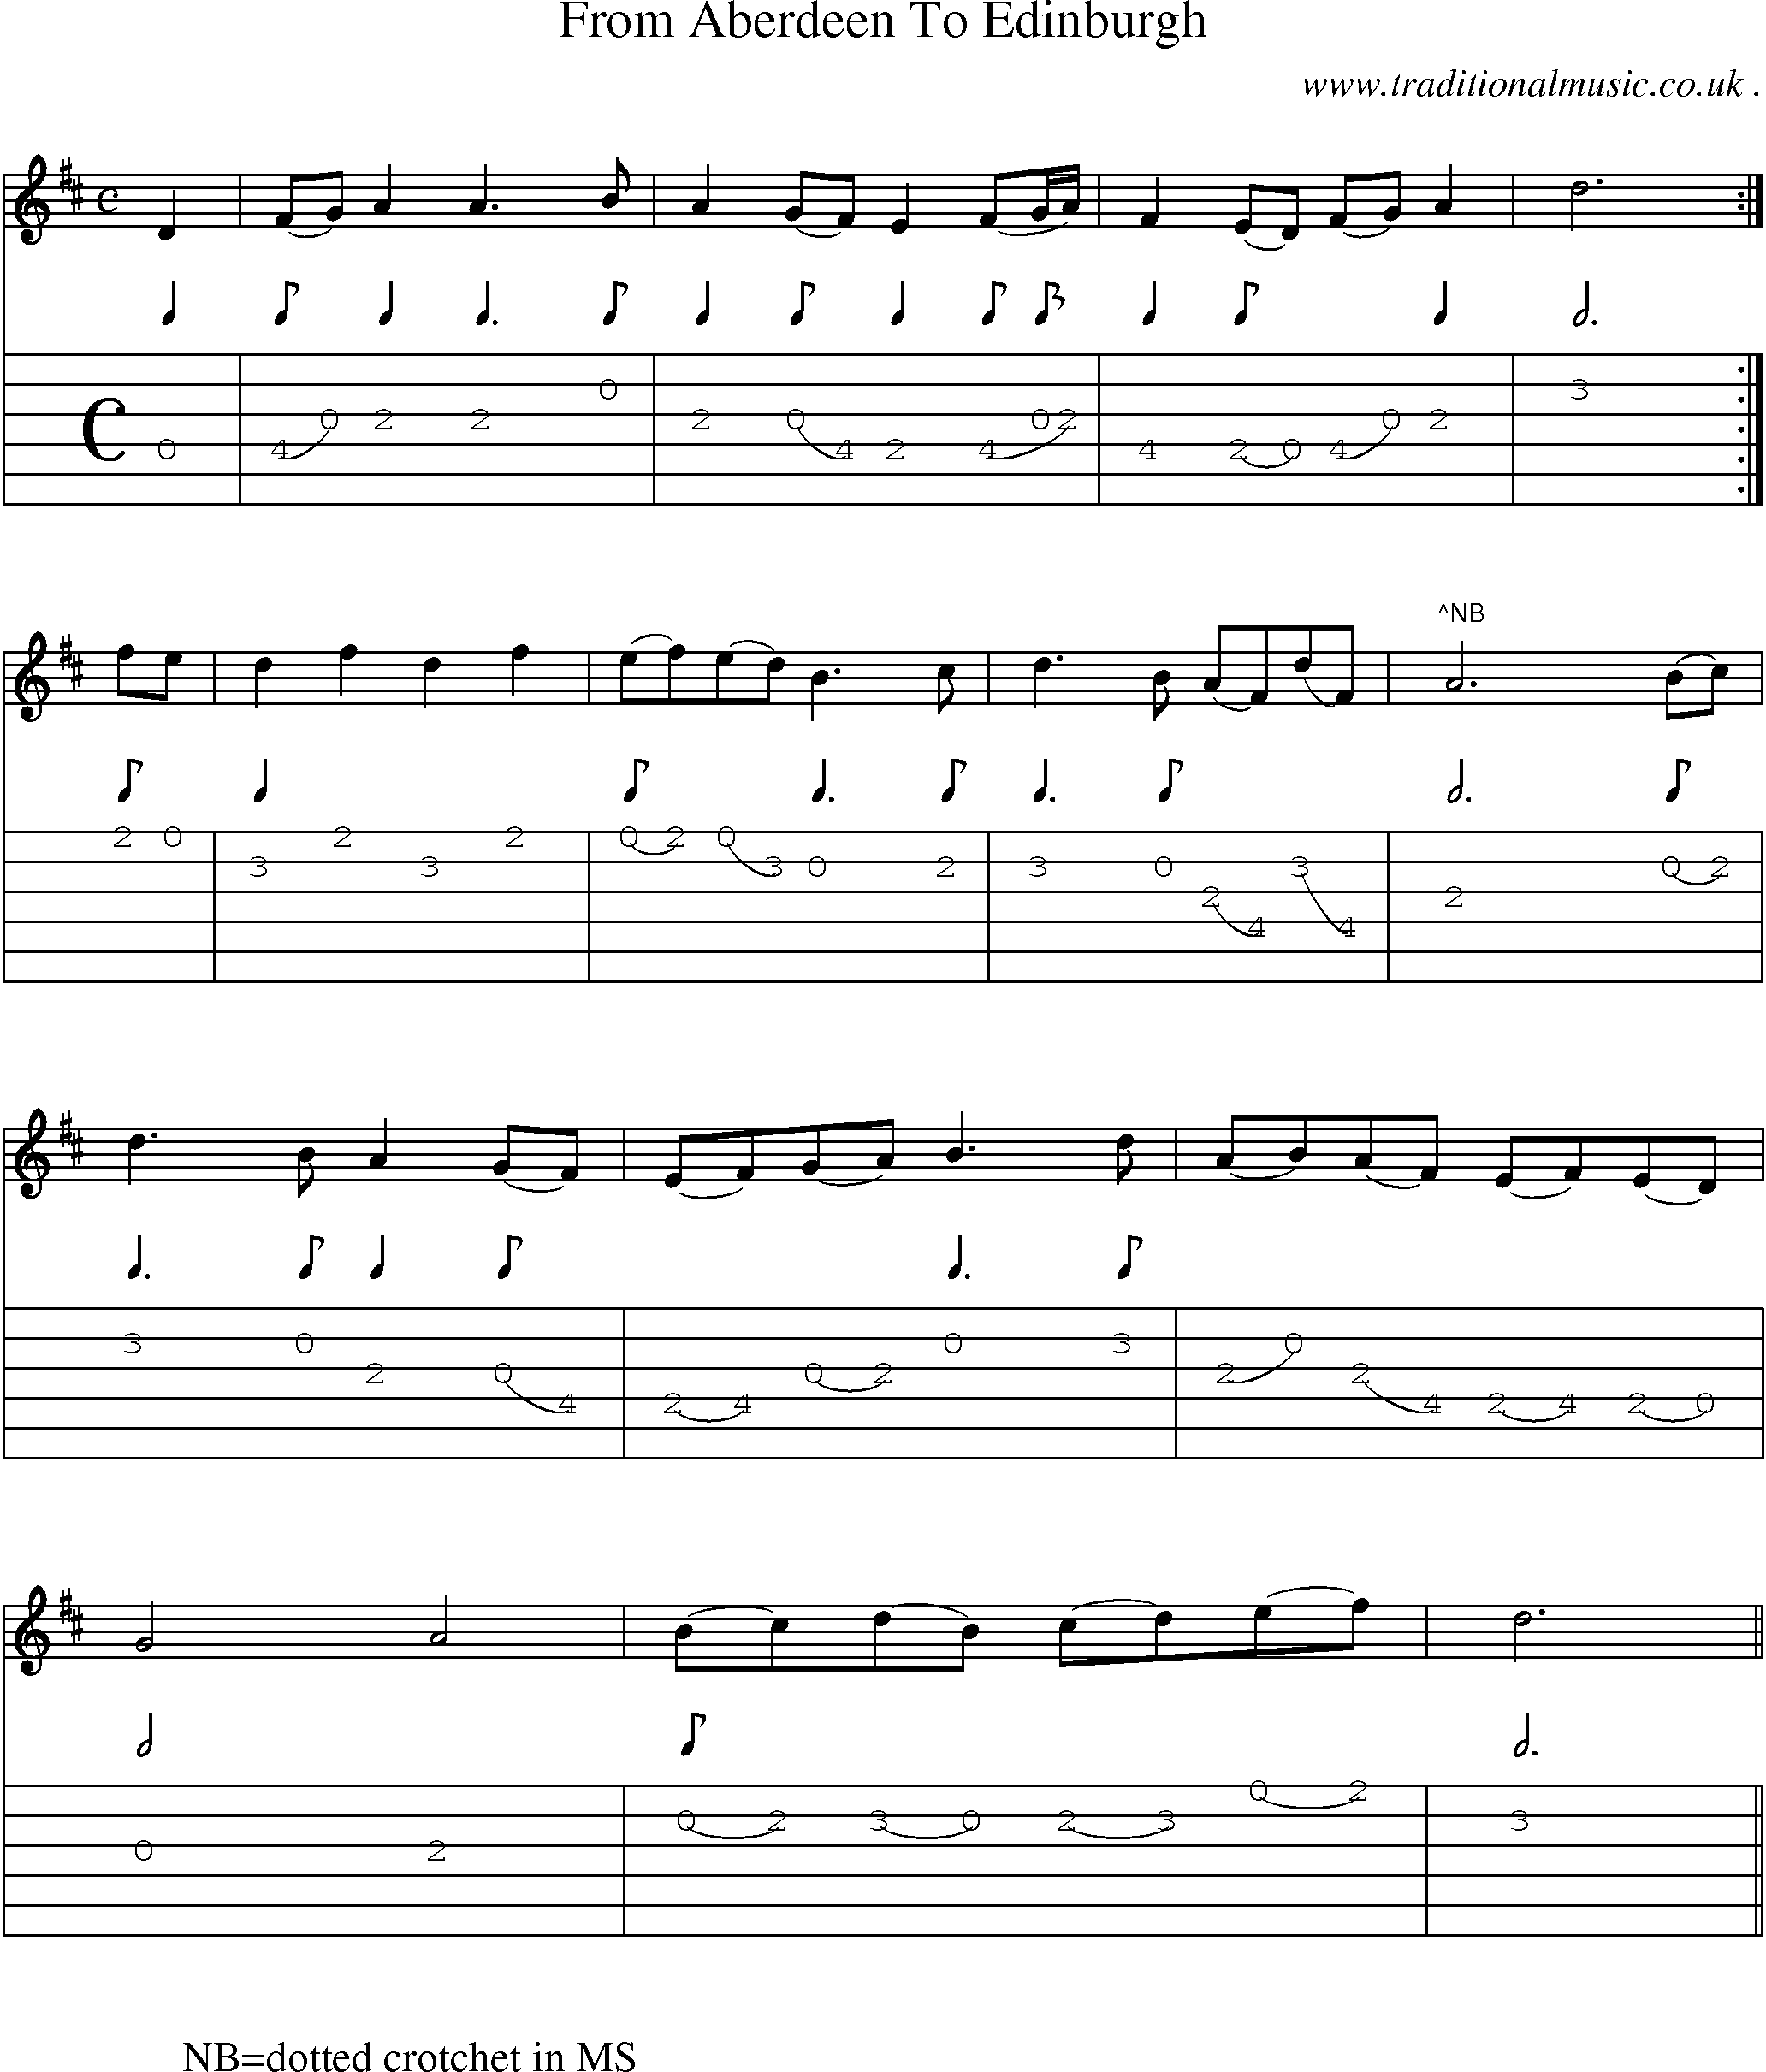 Sheet-Music and Guitar Tabs for From Aberdeen To Edinburgh